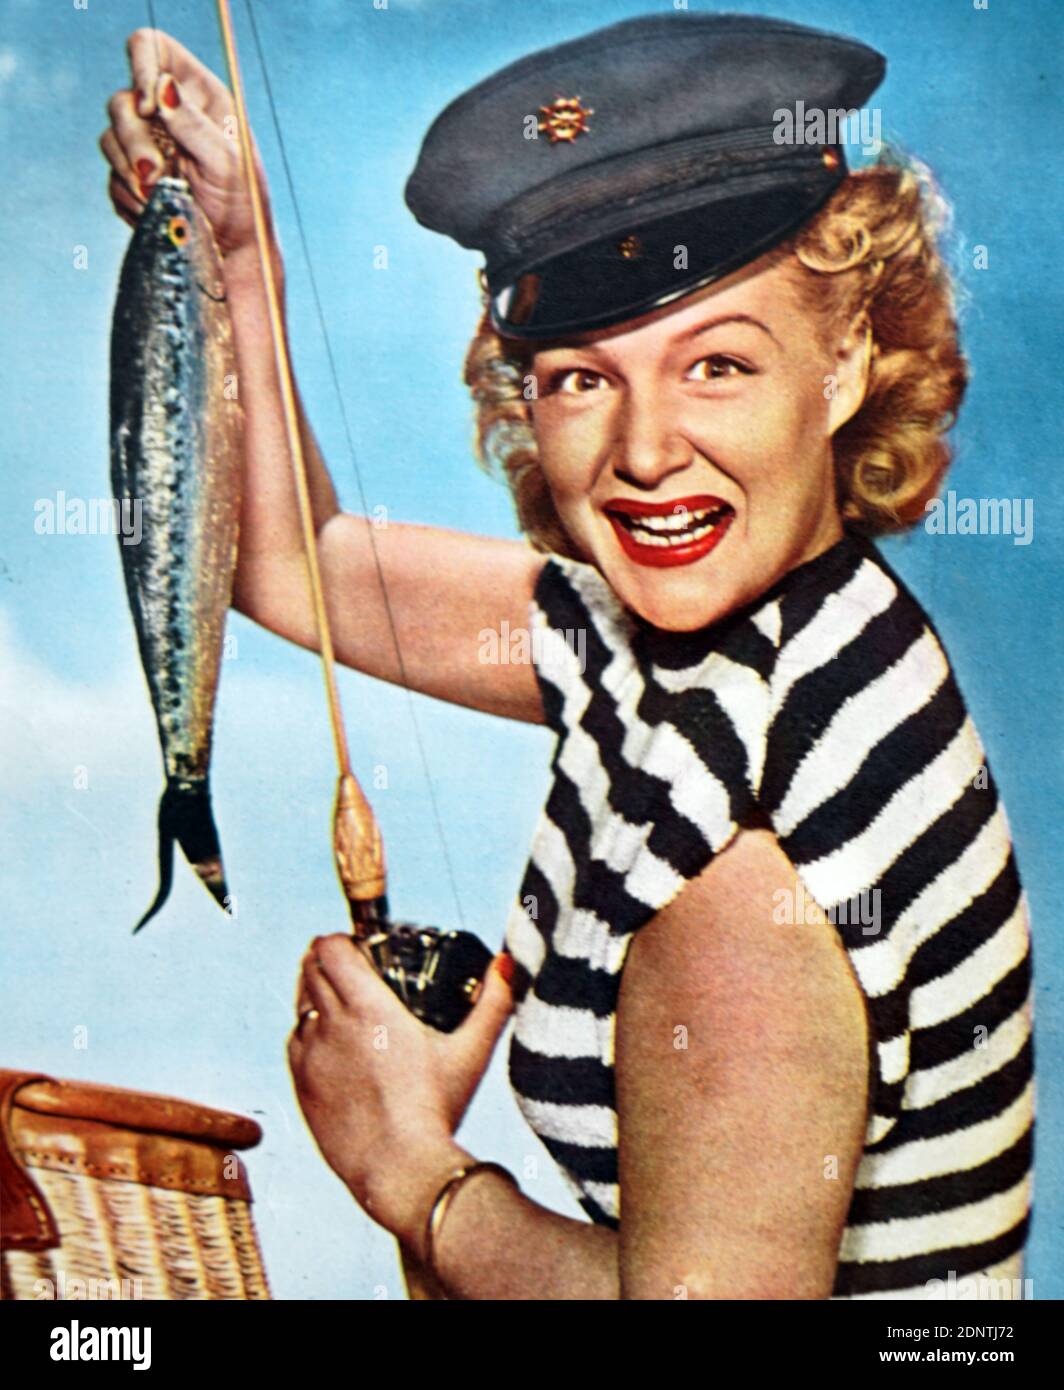 Photograph of Betty Hutton (1921-2007) an American stage, film, and television actress, comedian, dancer and singer. Stock Photo